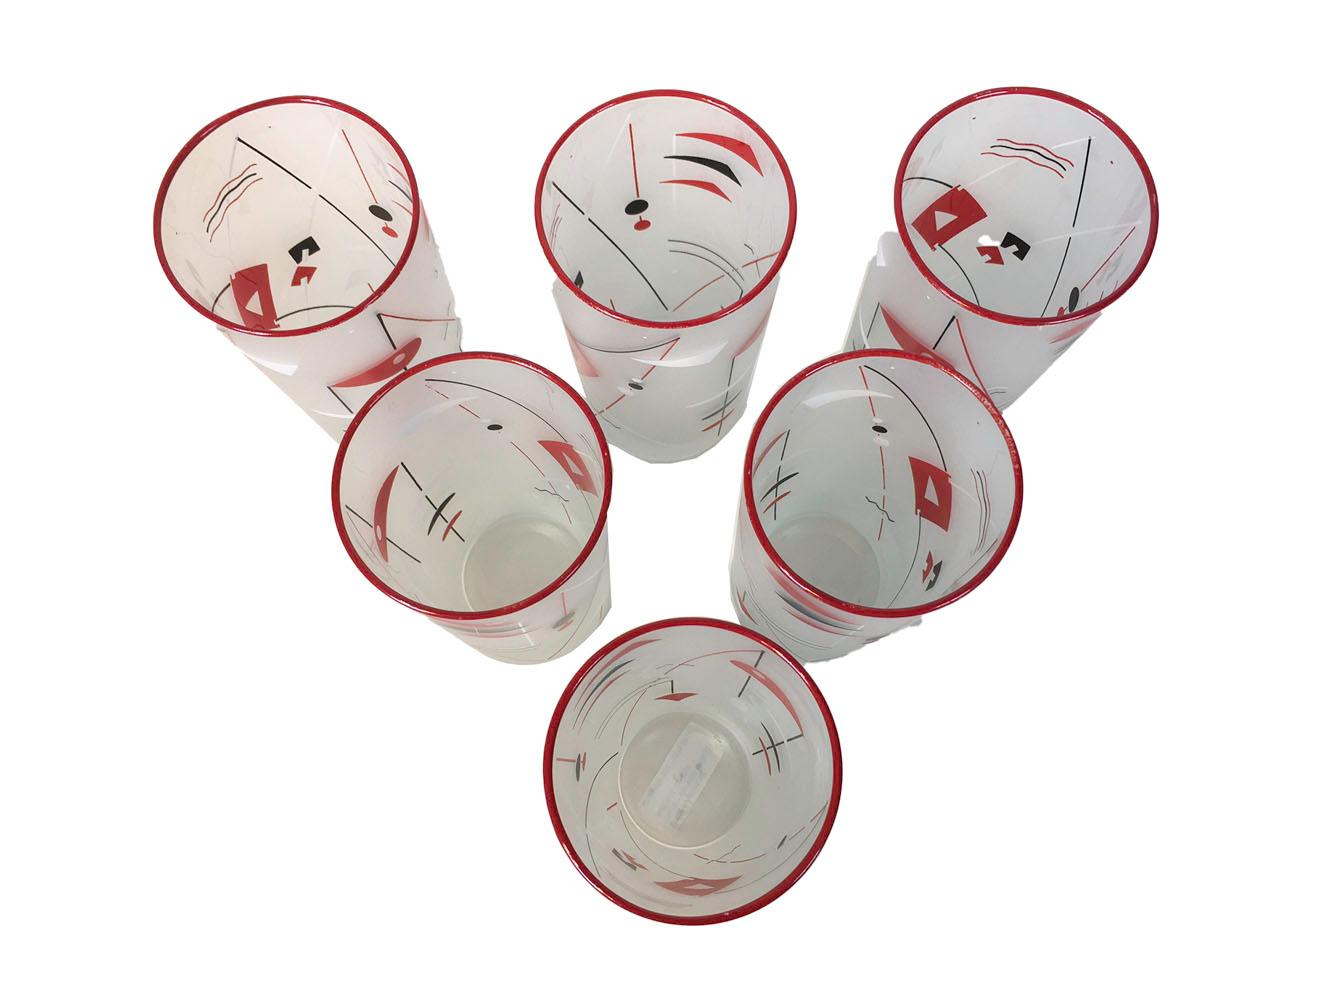 Rare, Libbey Glass Co. abstract atomic period bar glasses with black, red and white geometric shapes on a frosted ground and with a red enameled rim. All in excellent condition.